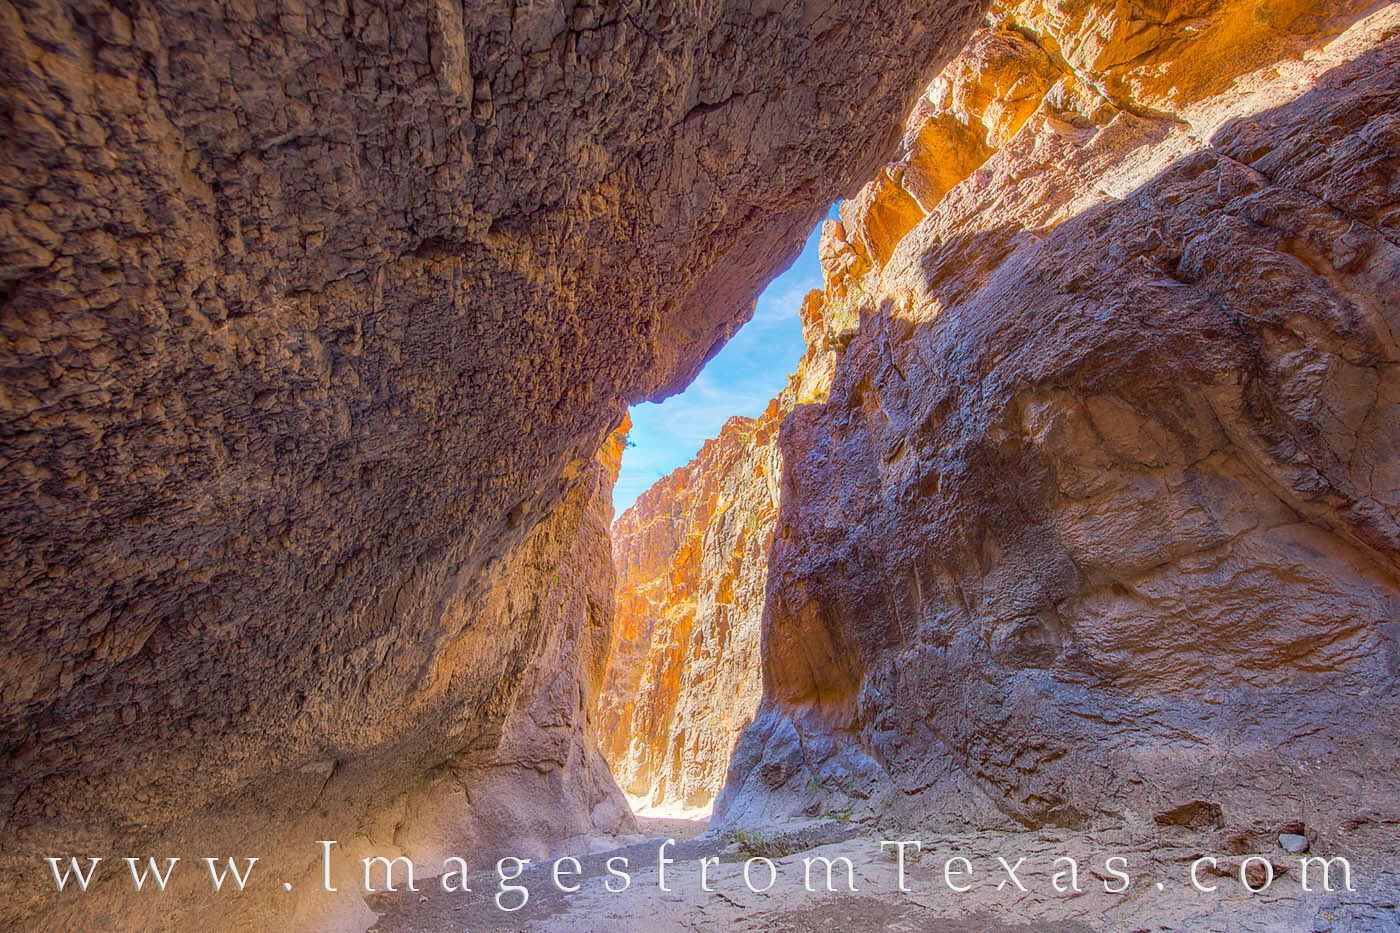 A rocky overhang offers shade on a spring day in Closed Canyon, a magnificent slot canyon in Big Bend Ranch State Park. Even...